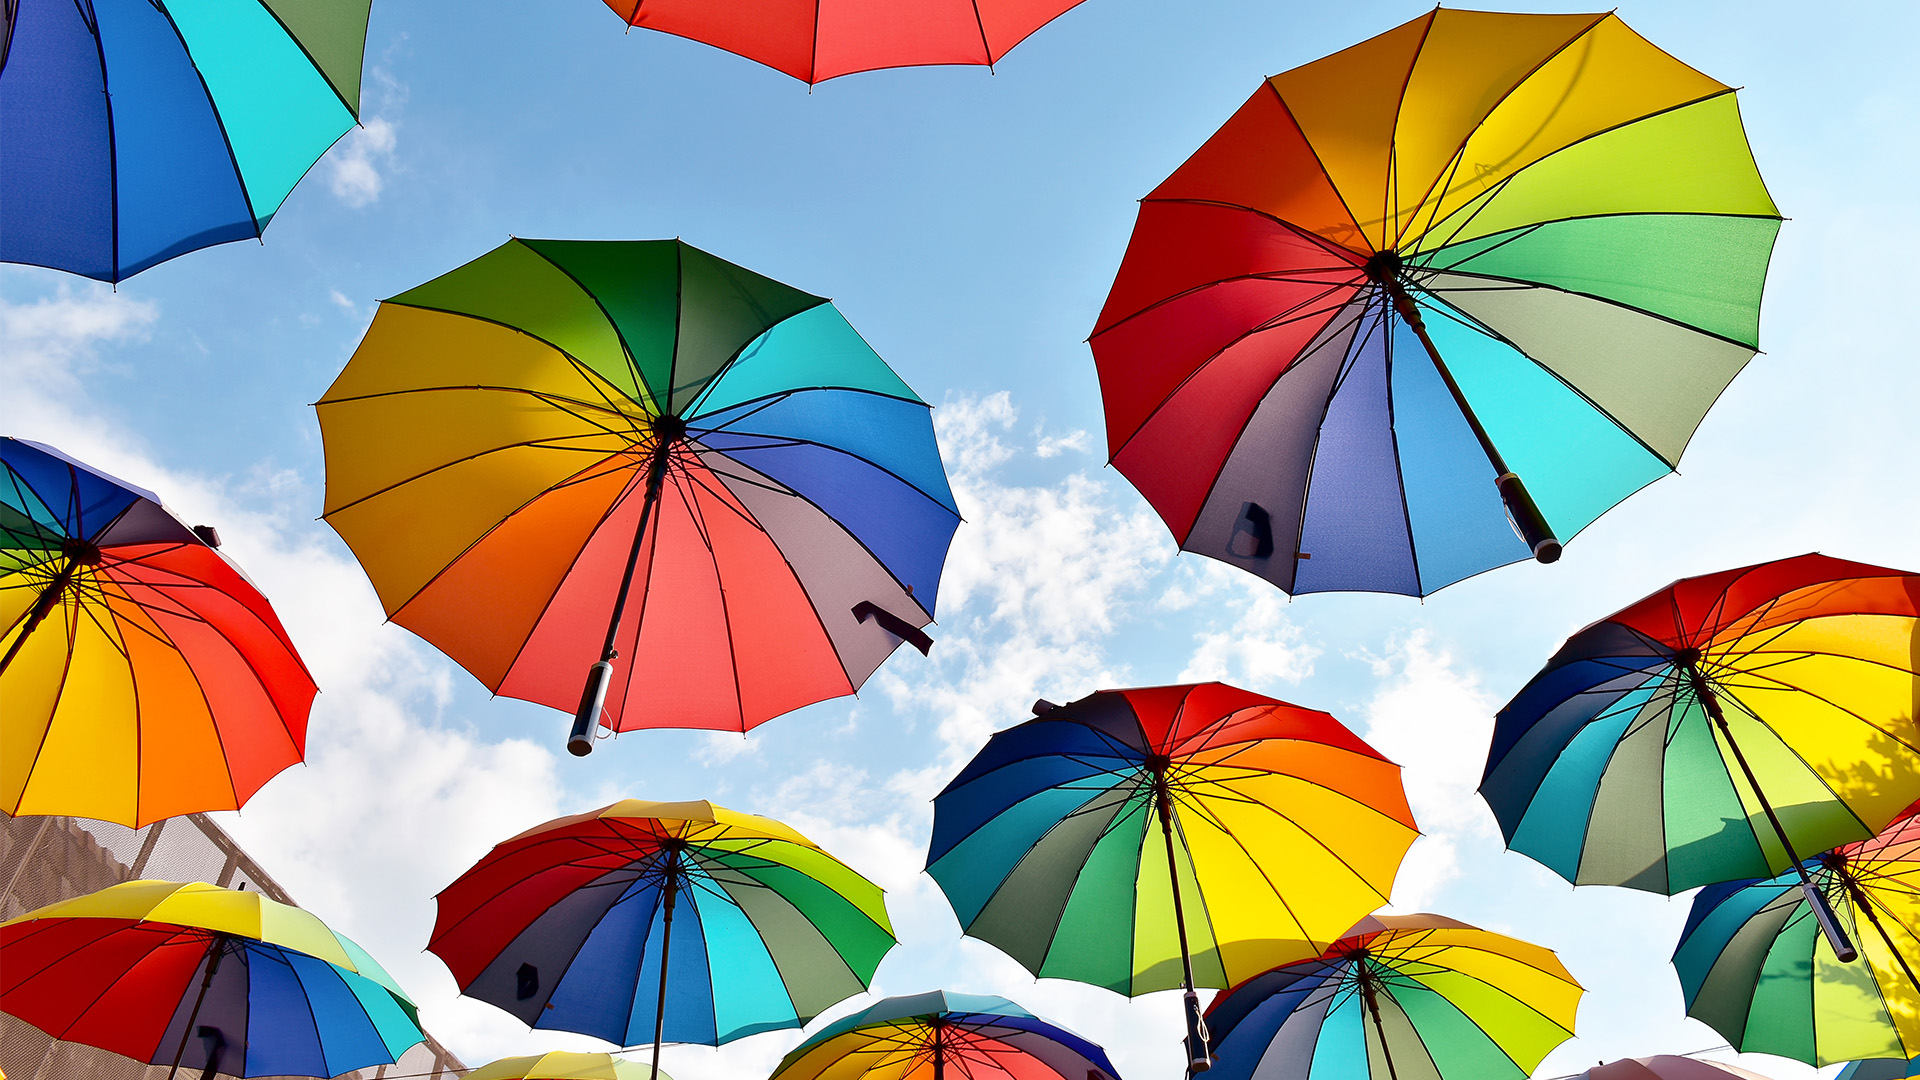 opened umbrellas with a rainbow pattern against the backdrop of the sky